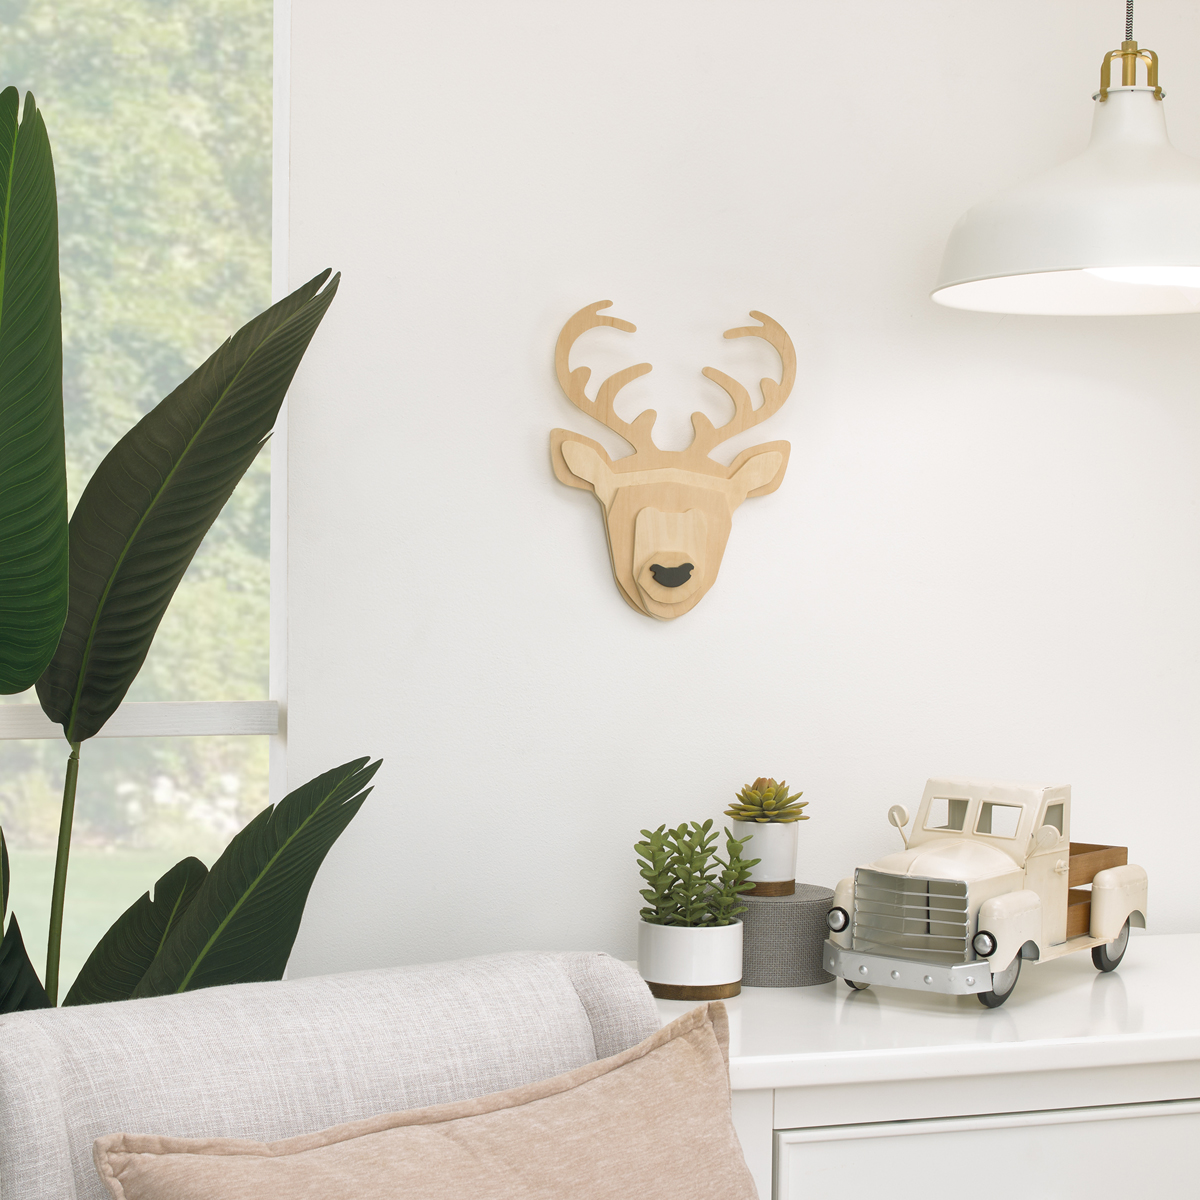 Little Love By NoJo Wood Layered Deer Wall Decor